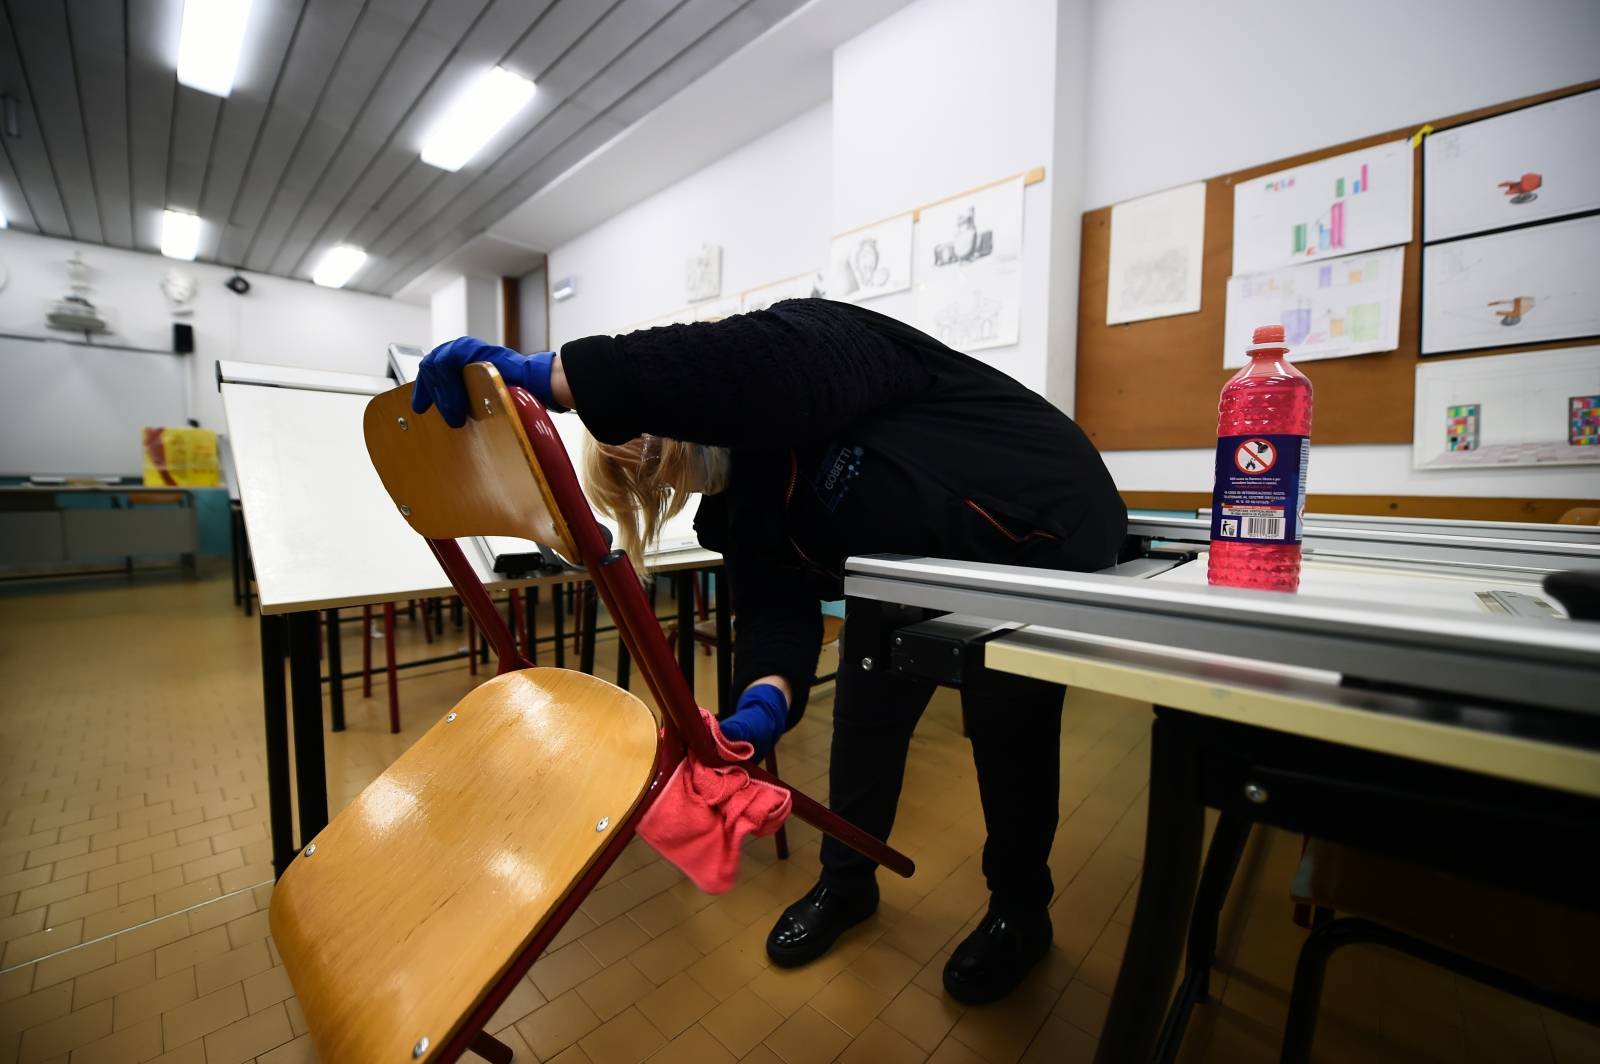 A cleaner sanitises a classroom at the Piero Gobetti high school in Turin